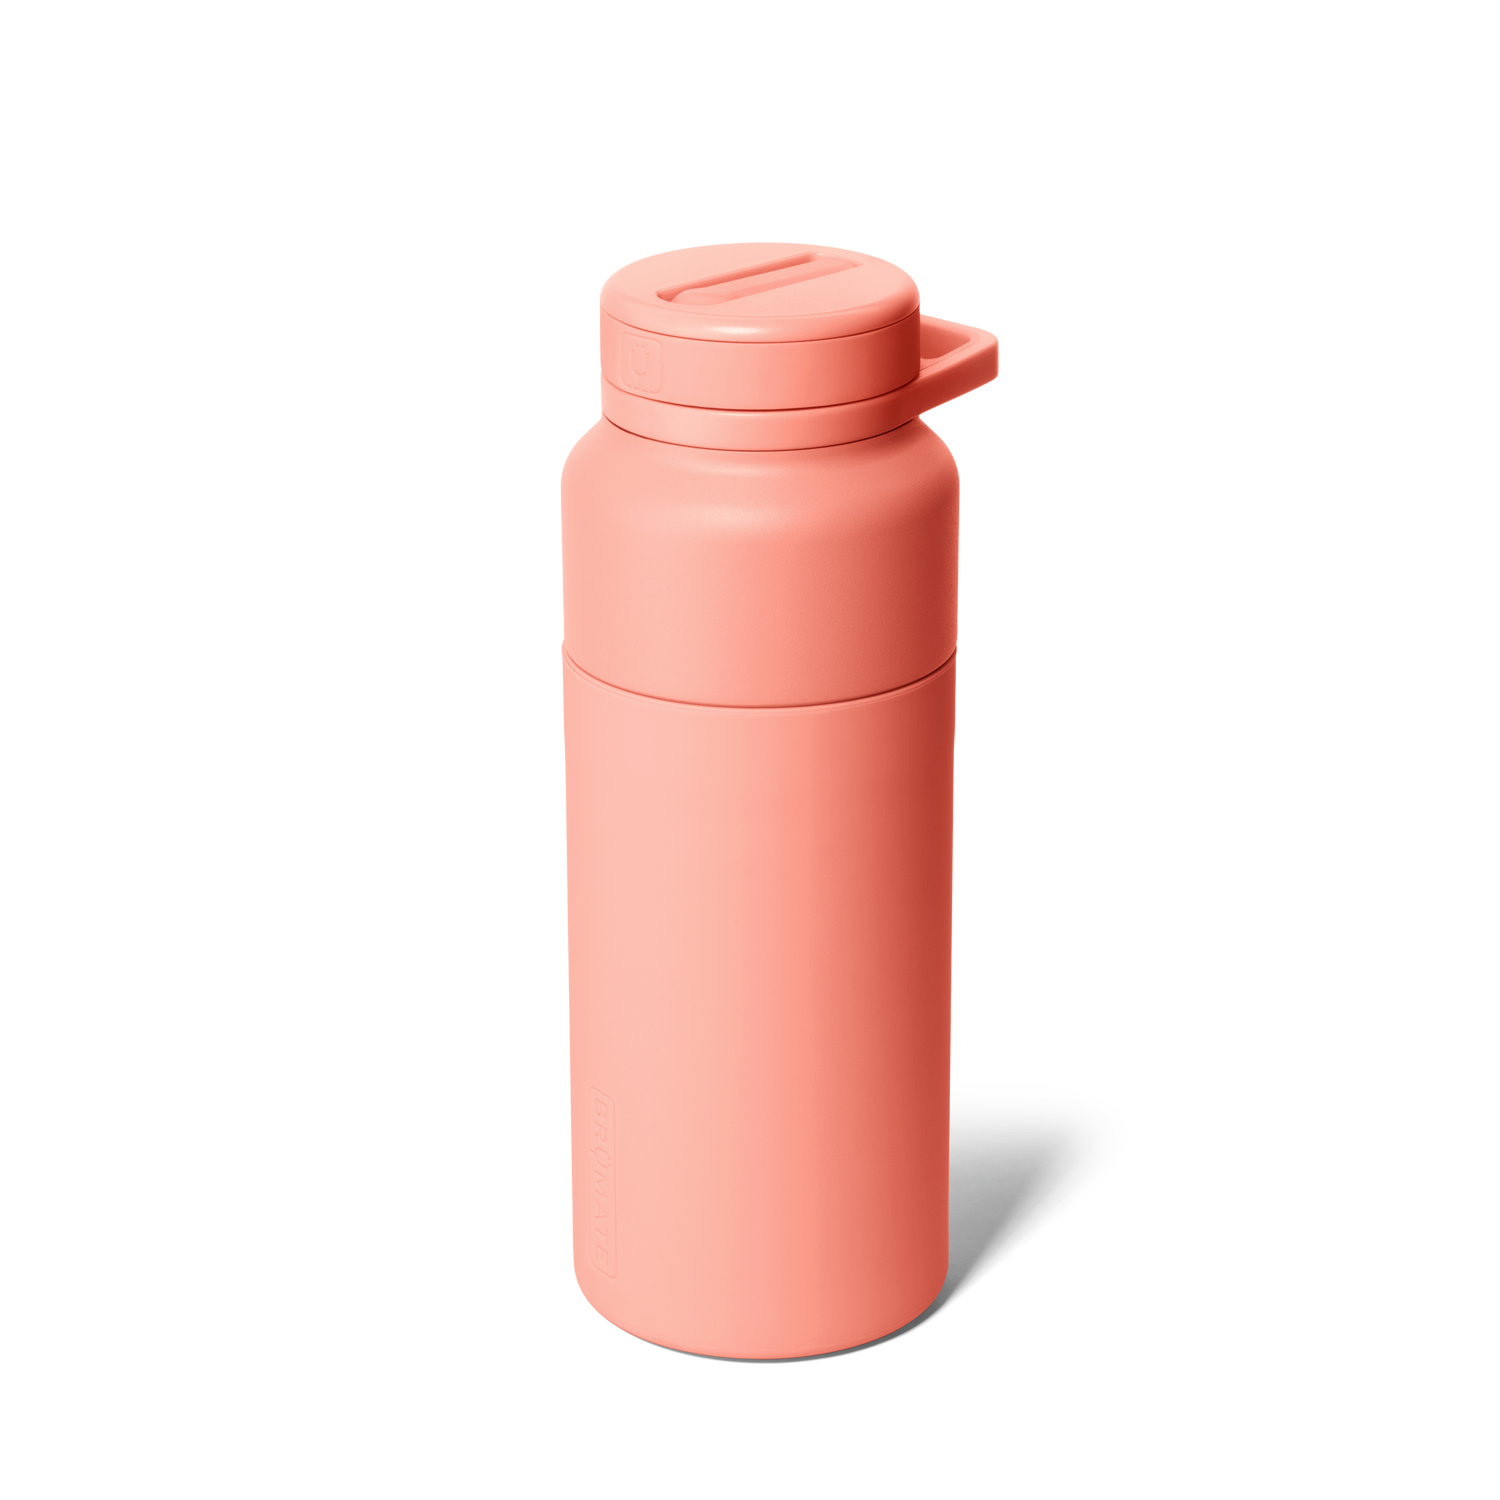 guava Rotera 35 Ounce Water Bottle is solid pink and displayed against a white background